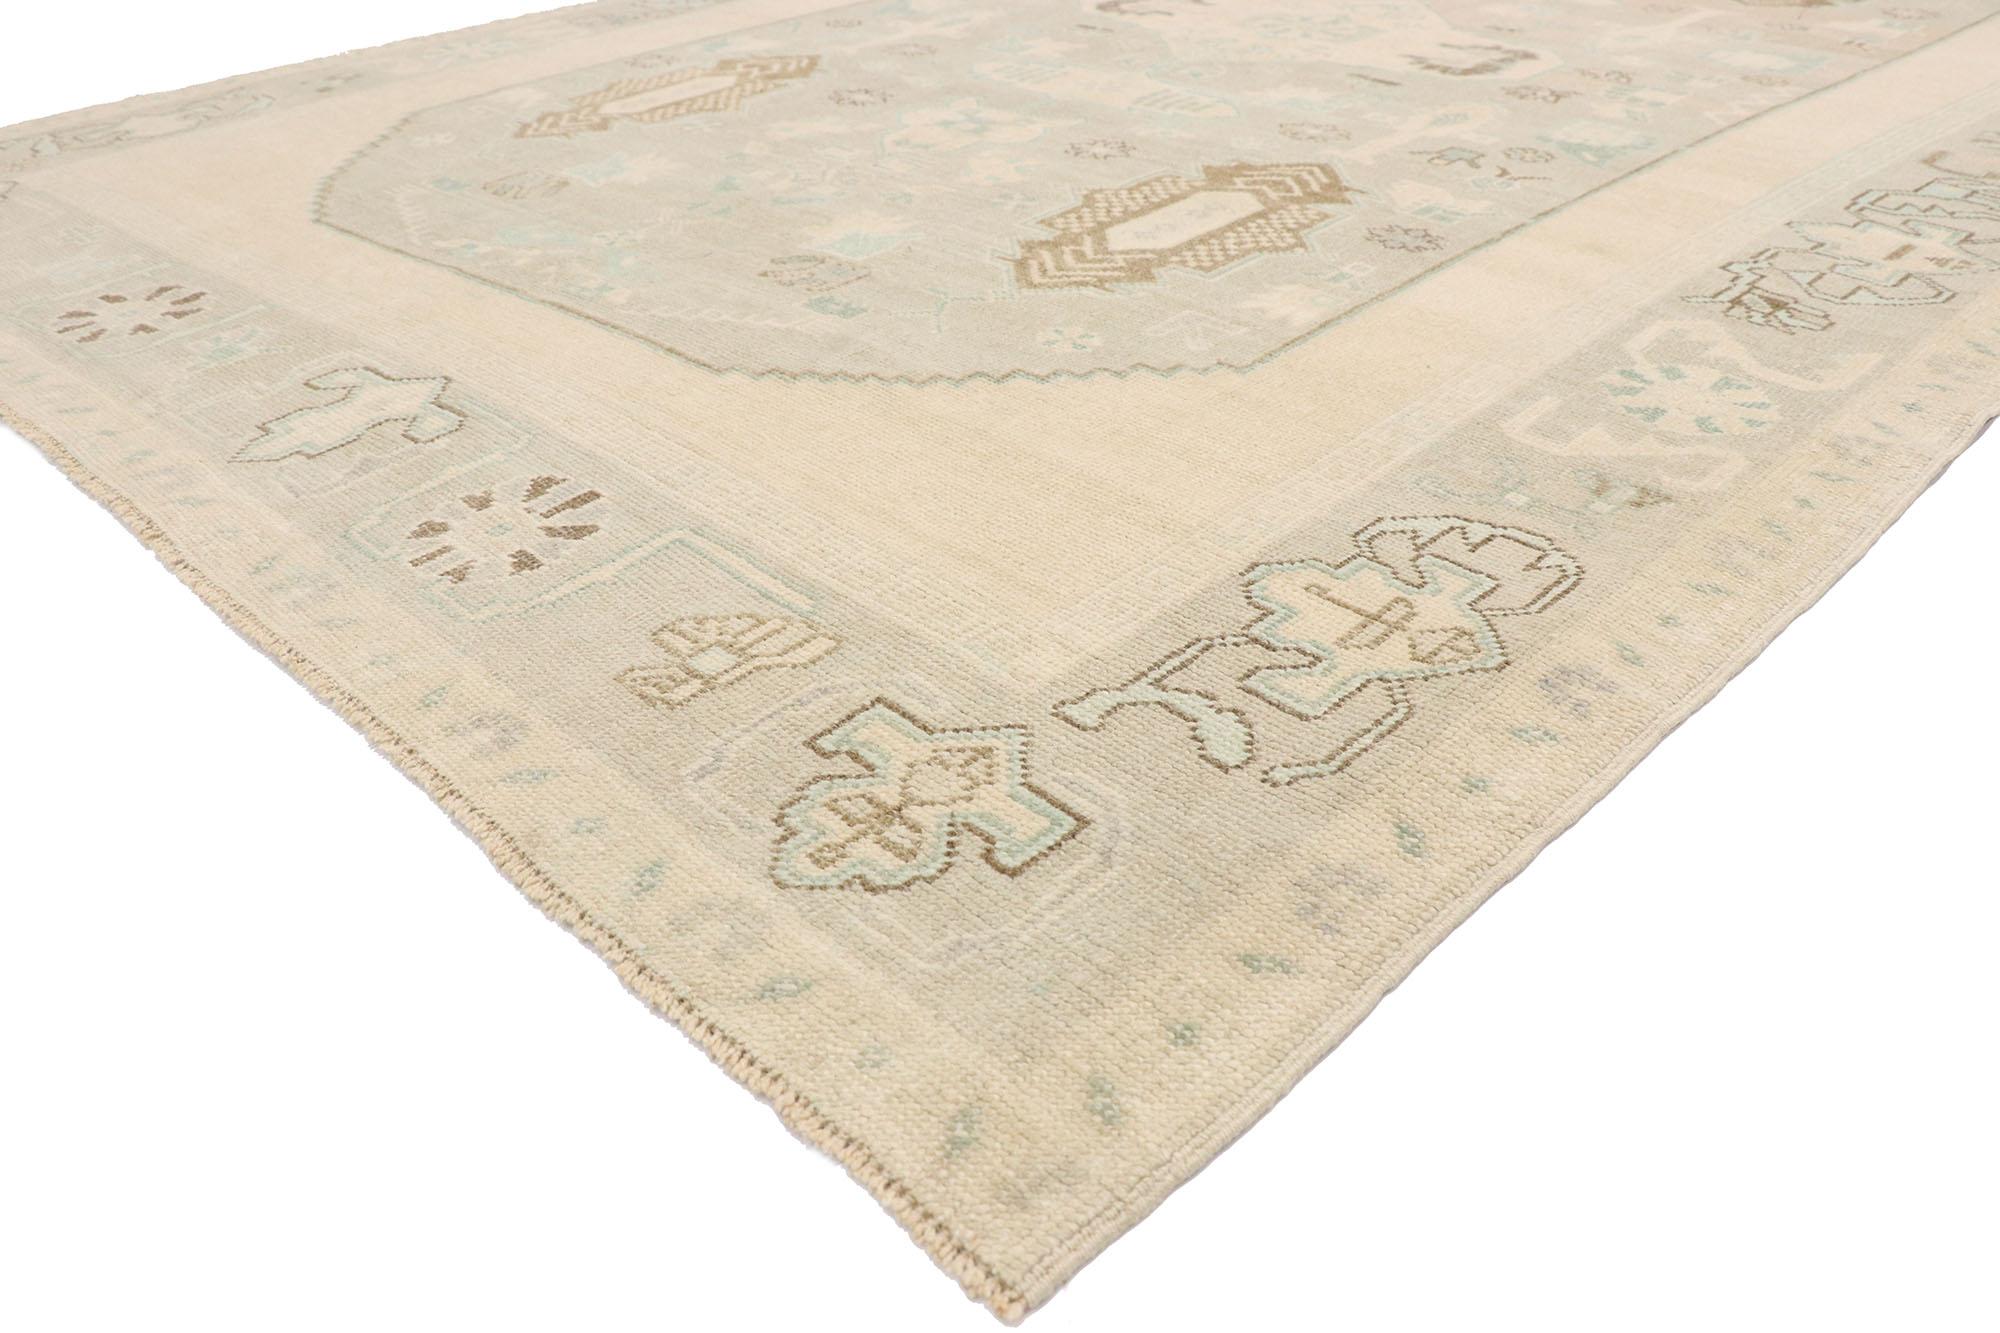 52808 Muted Vintage Turkish Oushak Rug, 06'02 x 09'07.
Take a timeless, tailored design, mix in a dash of history and antique-washed colors to get this fresh look that’s as comfortable as it is chic. This hand-knotted wool vintage Turkish Oushak rug